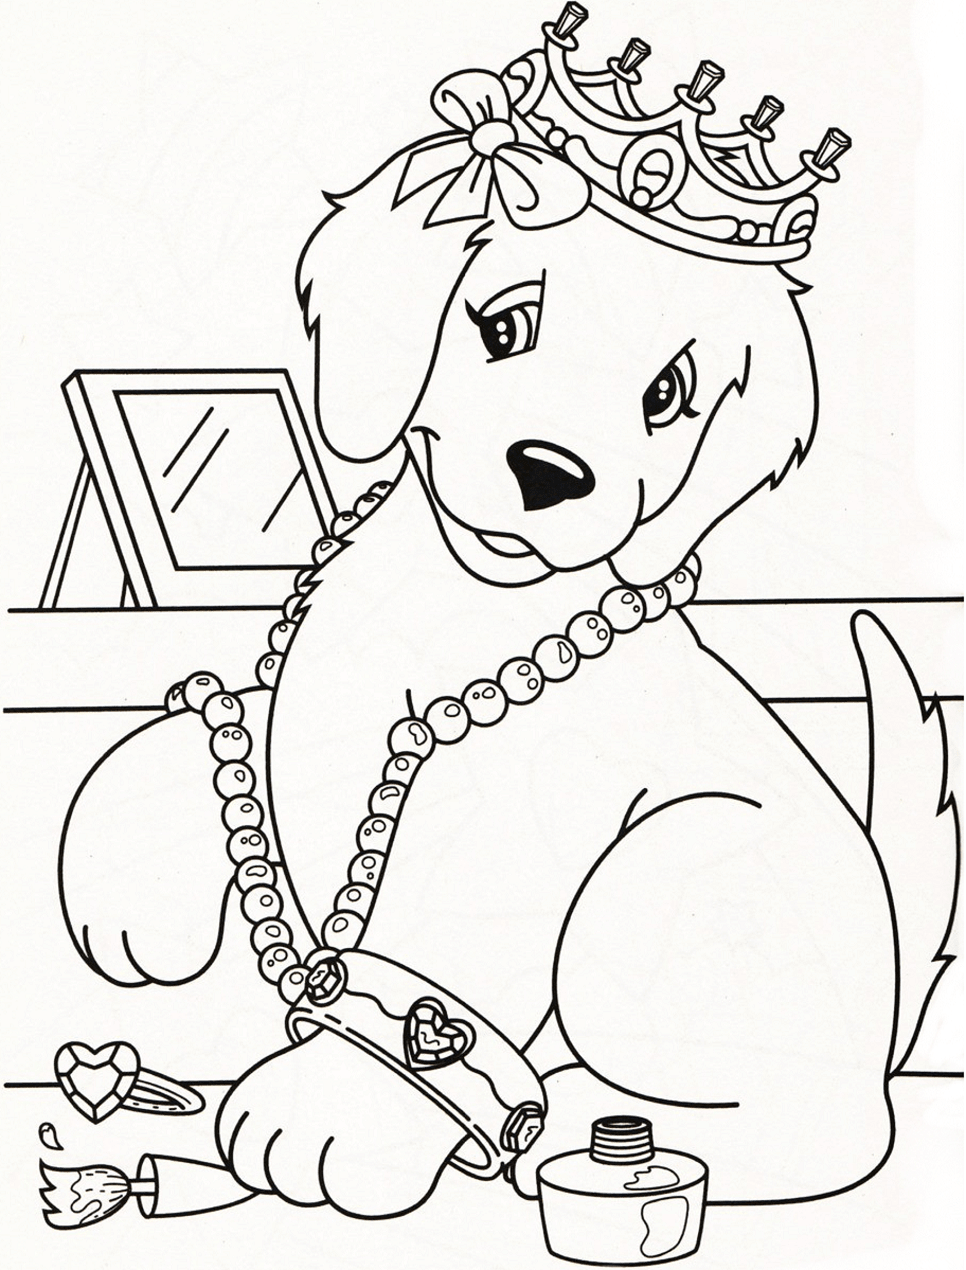 Download Candy Dog Lisa Frank Coloring Page - Free Printable Coloring Pages for Kids